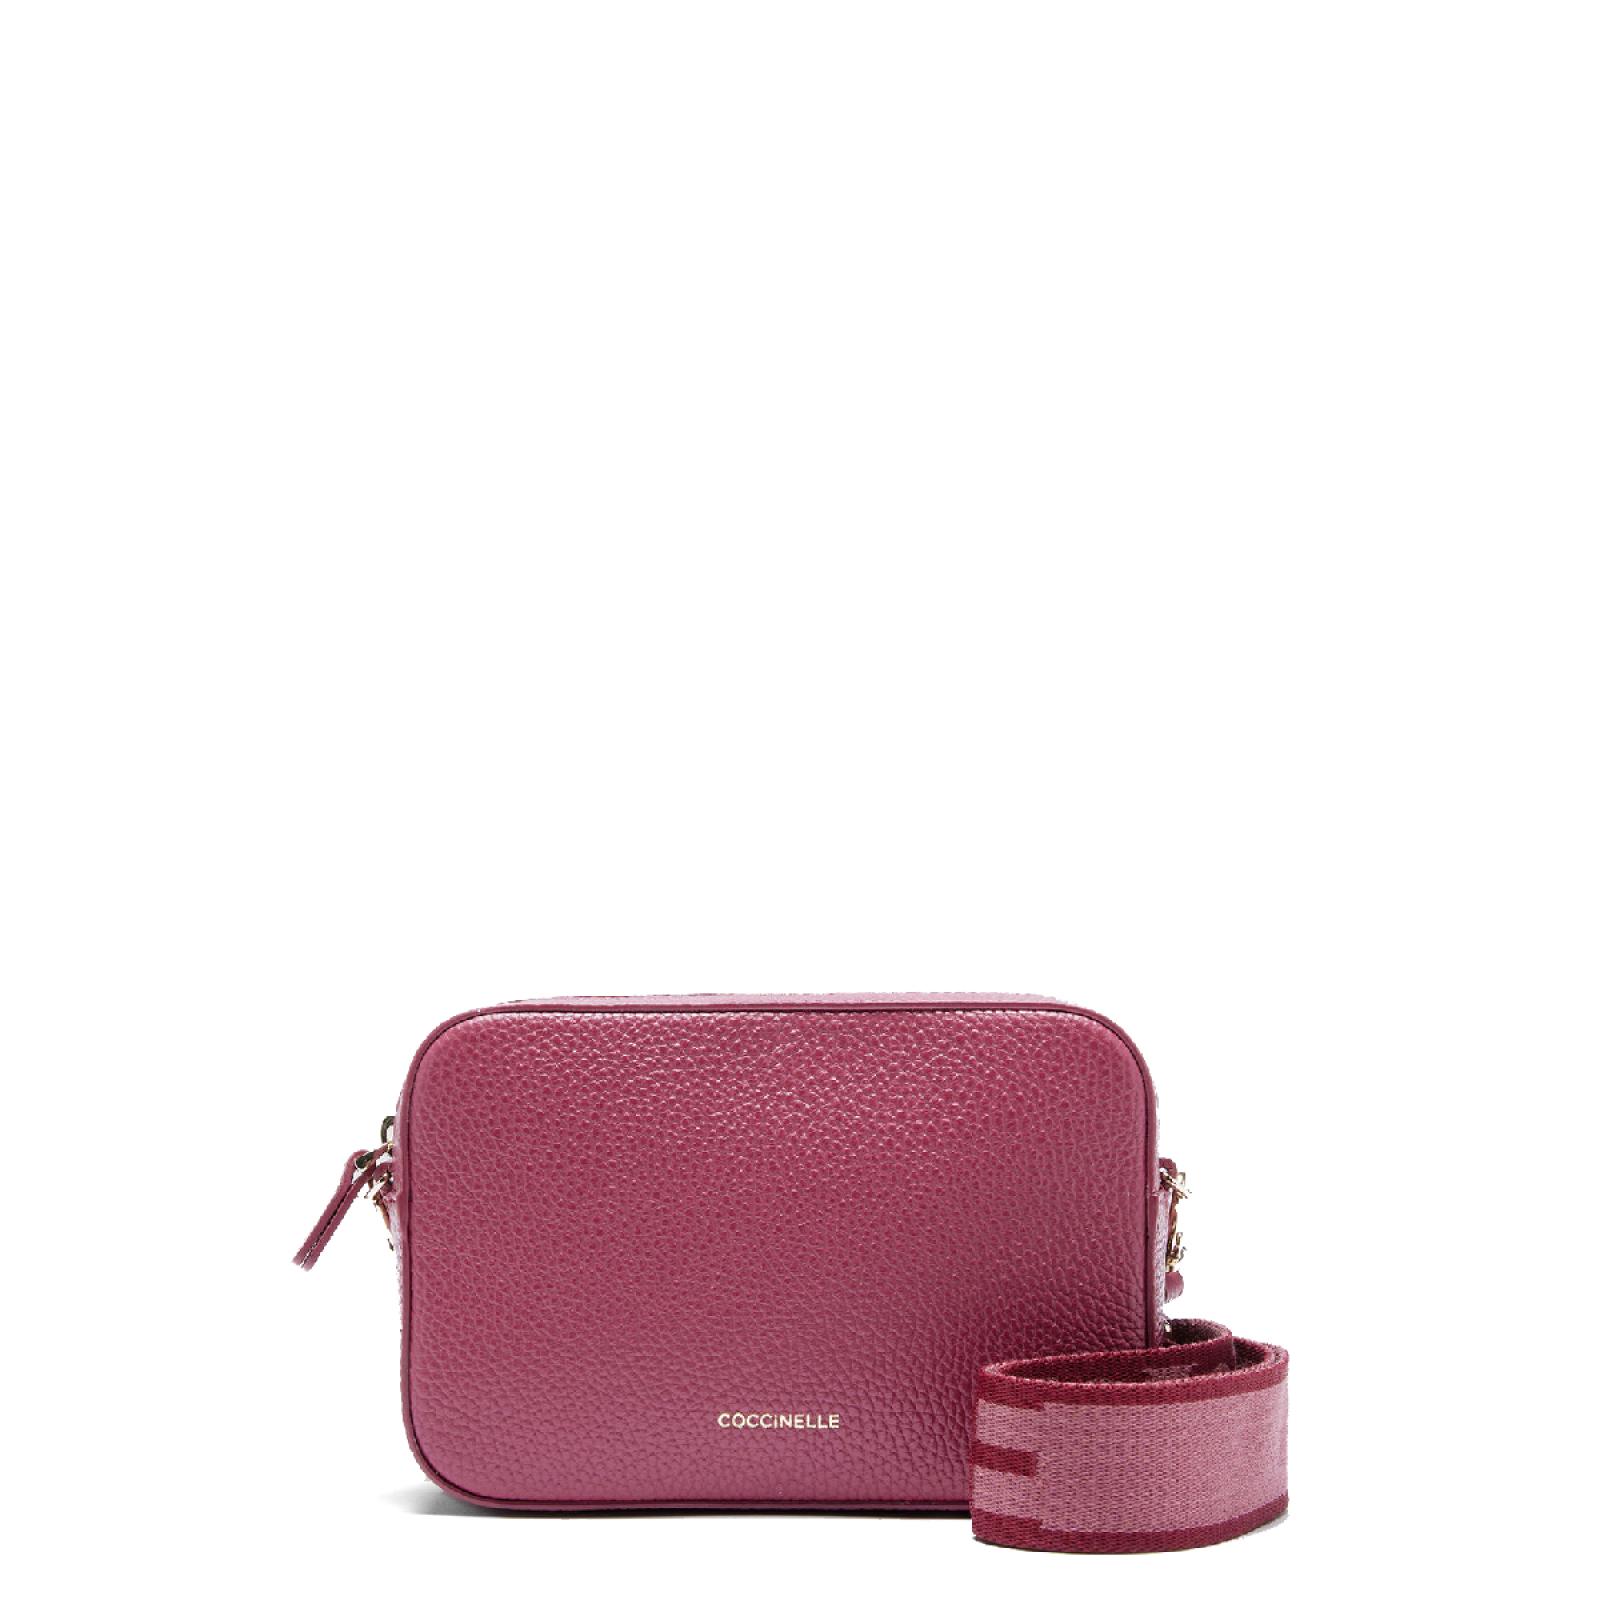 Coccinelle Minibag Tebe Pulp Pink - 1